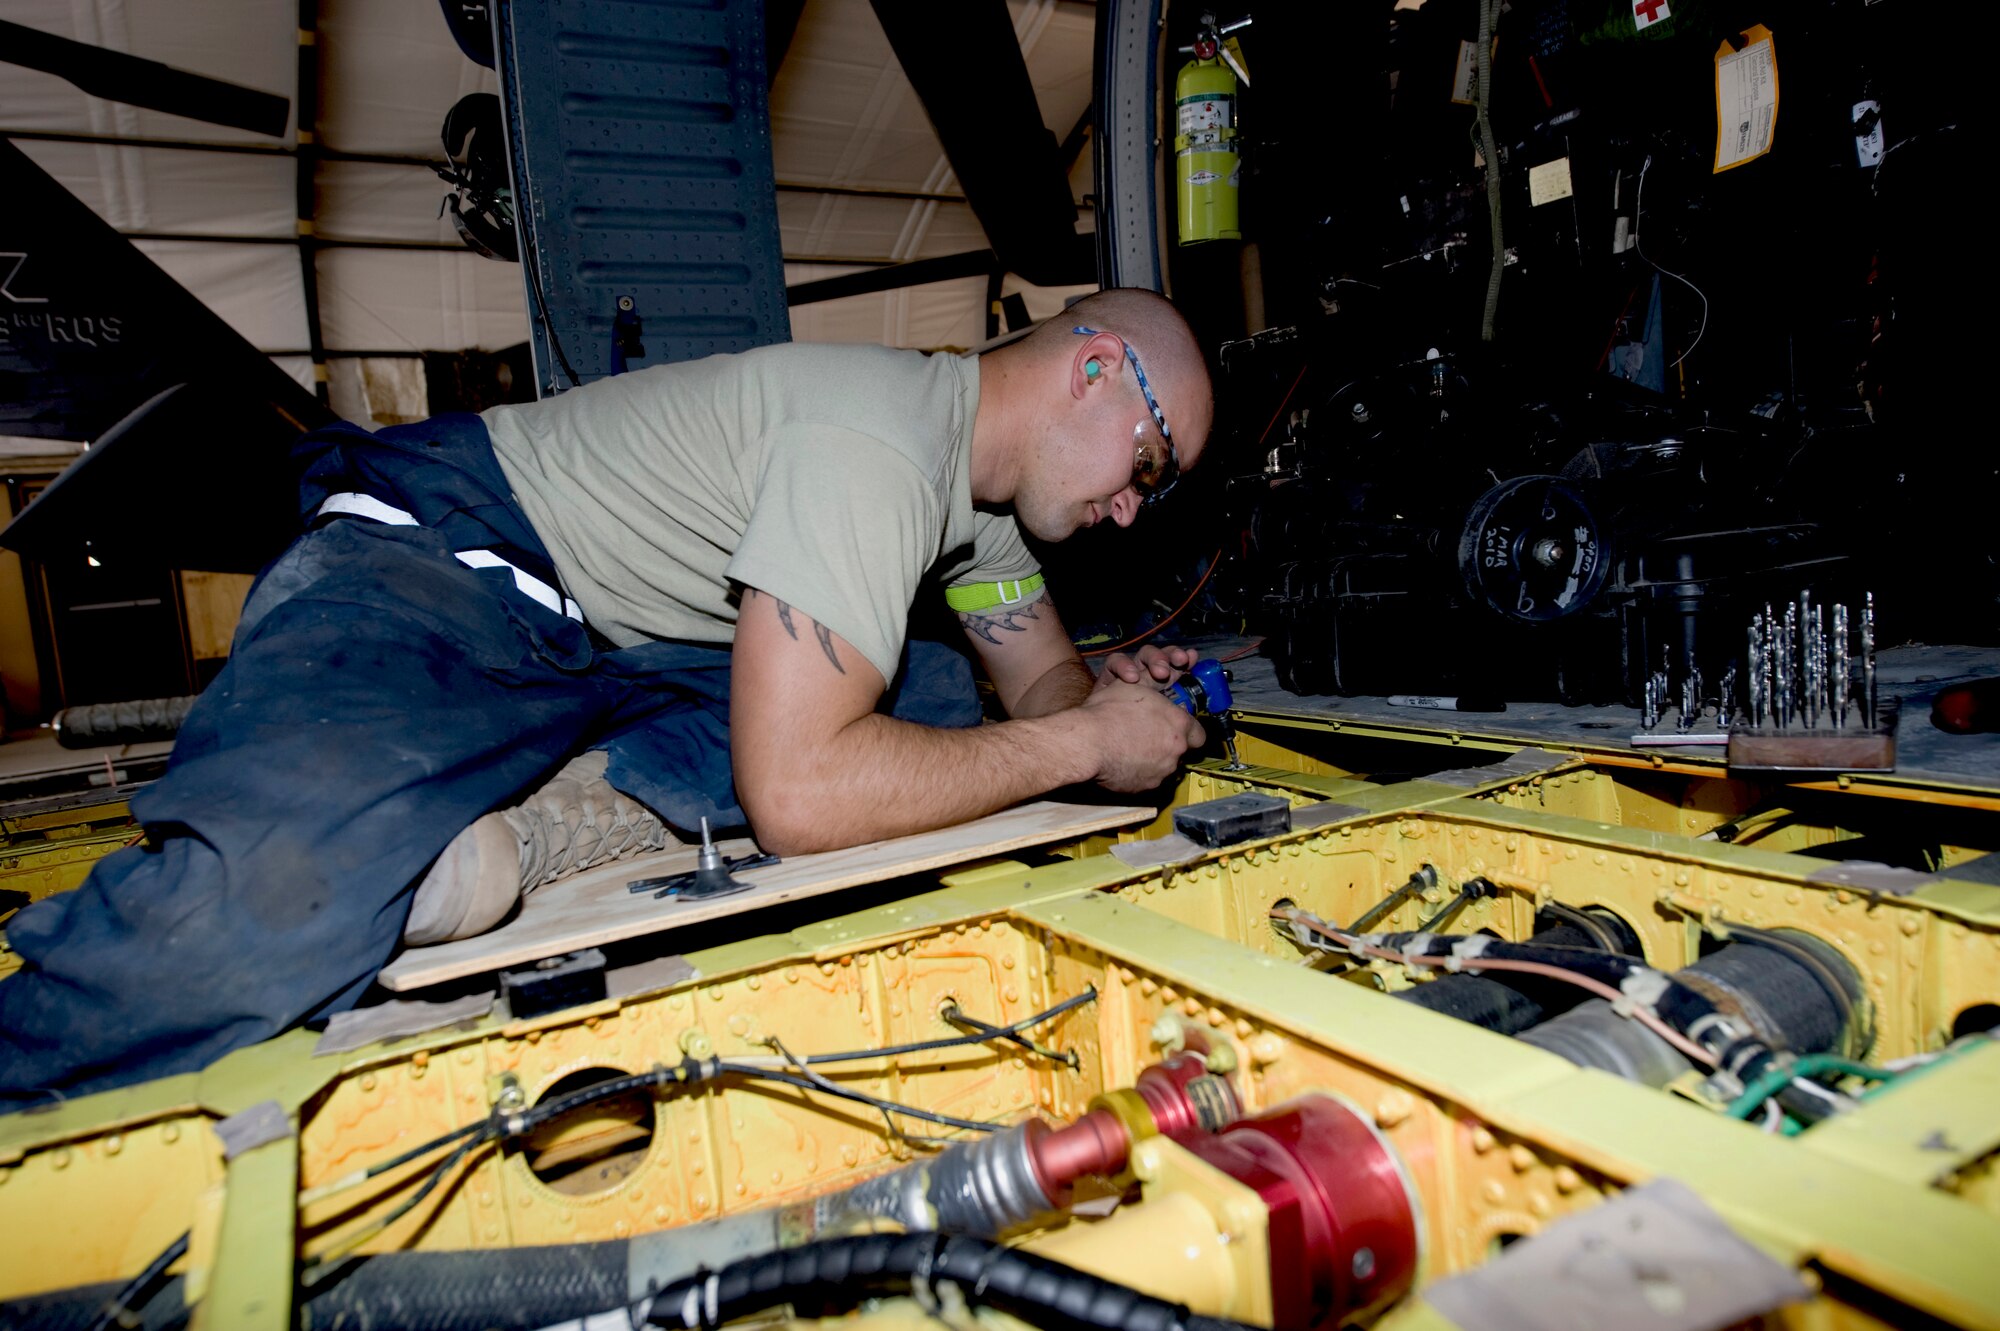 A 455th Expeditionary Aircraft Maintenance Squadron aircraft maintainer repairs a part on an HH-60 helicopter at Bagram Airfield, Afghanistan, April 27, 2011. The 455th EAMXS is responsible for the maintenance of military aircraft on Bagram. (U.S. Air Force courtesy photo)